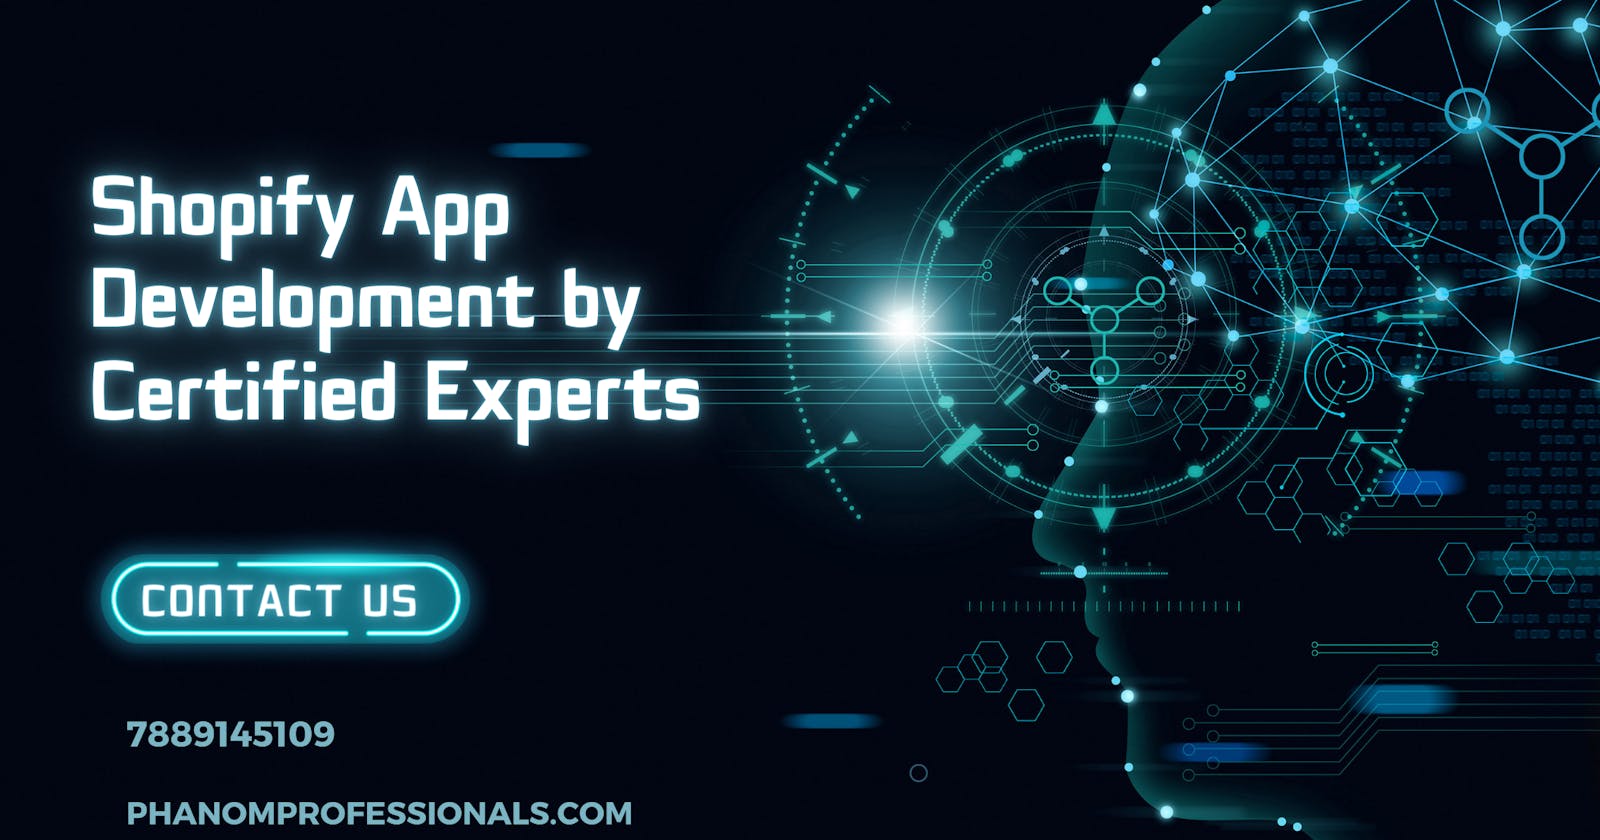 Shopify App Development by Certified Experts